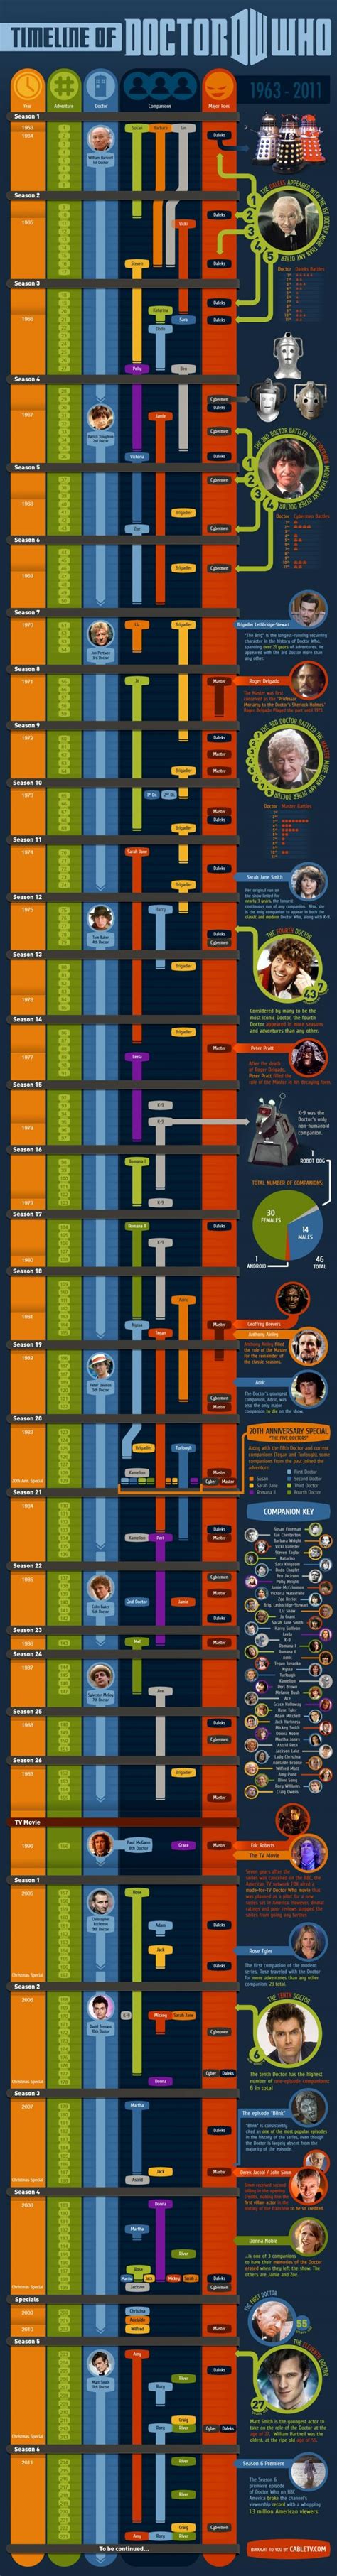 The Timeline Of Doctor Who Doctor Who Timeline